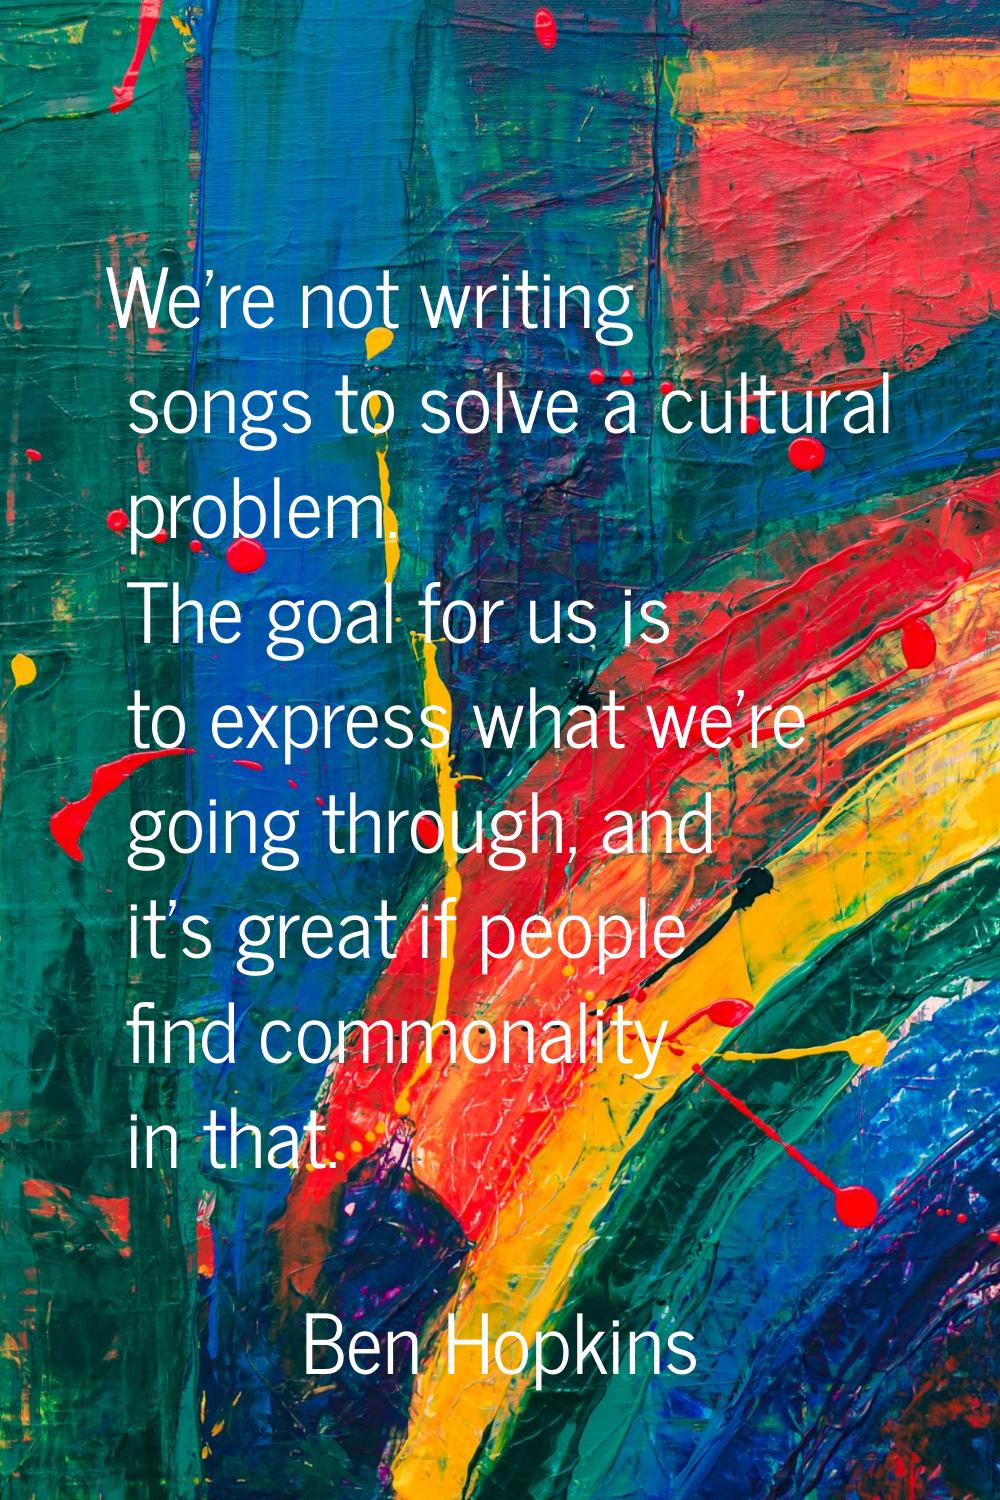 We're not writing songs to solve a cultural problem. The goal for us is to express what we're going